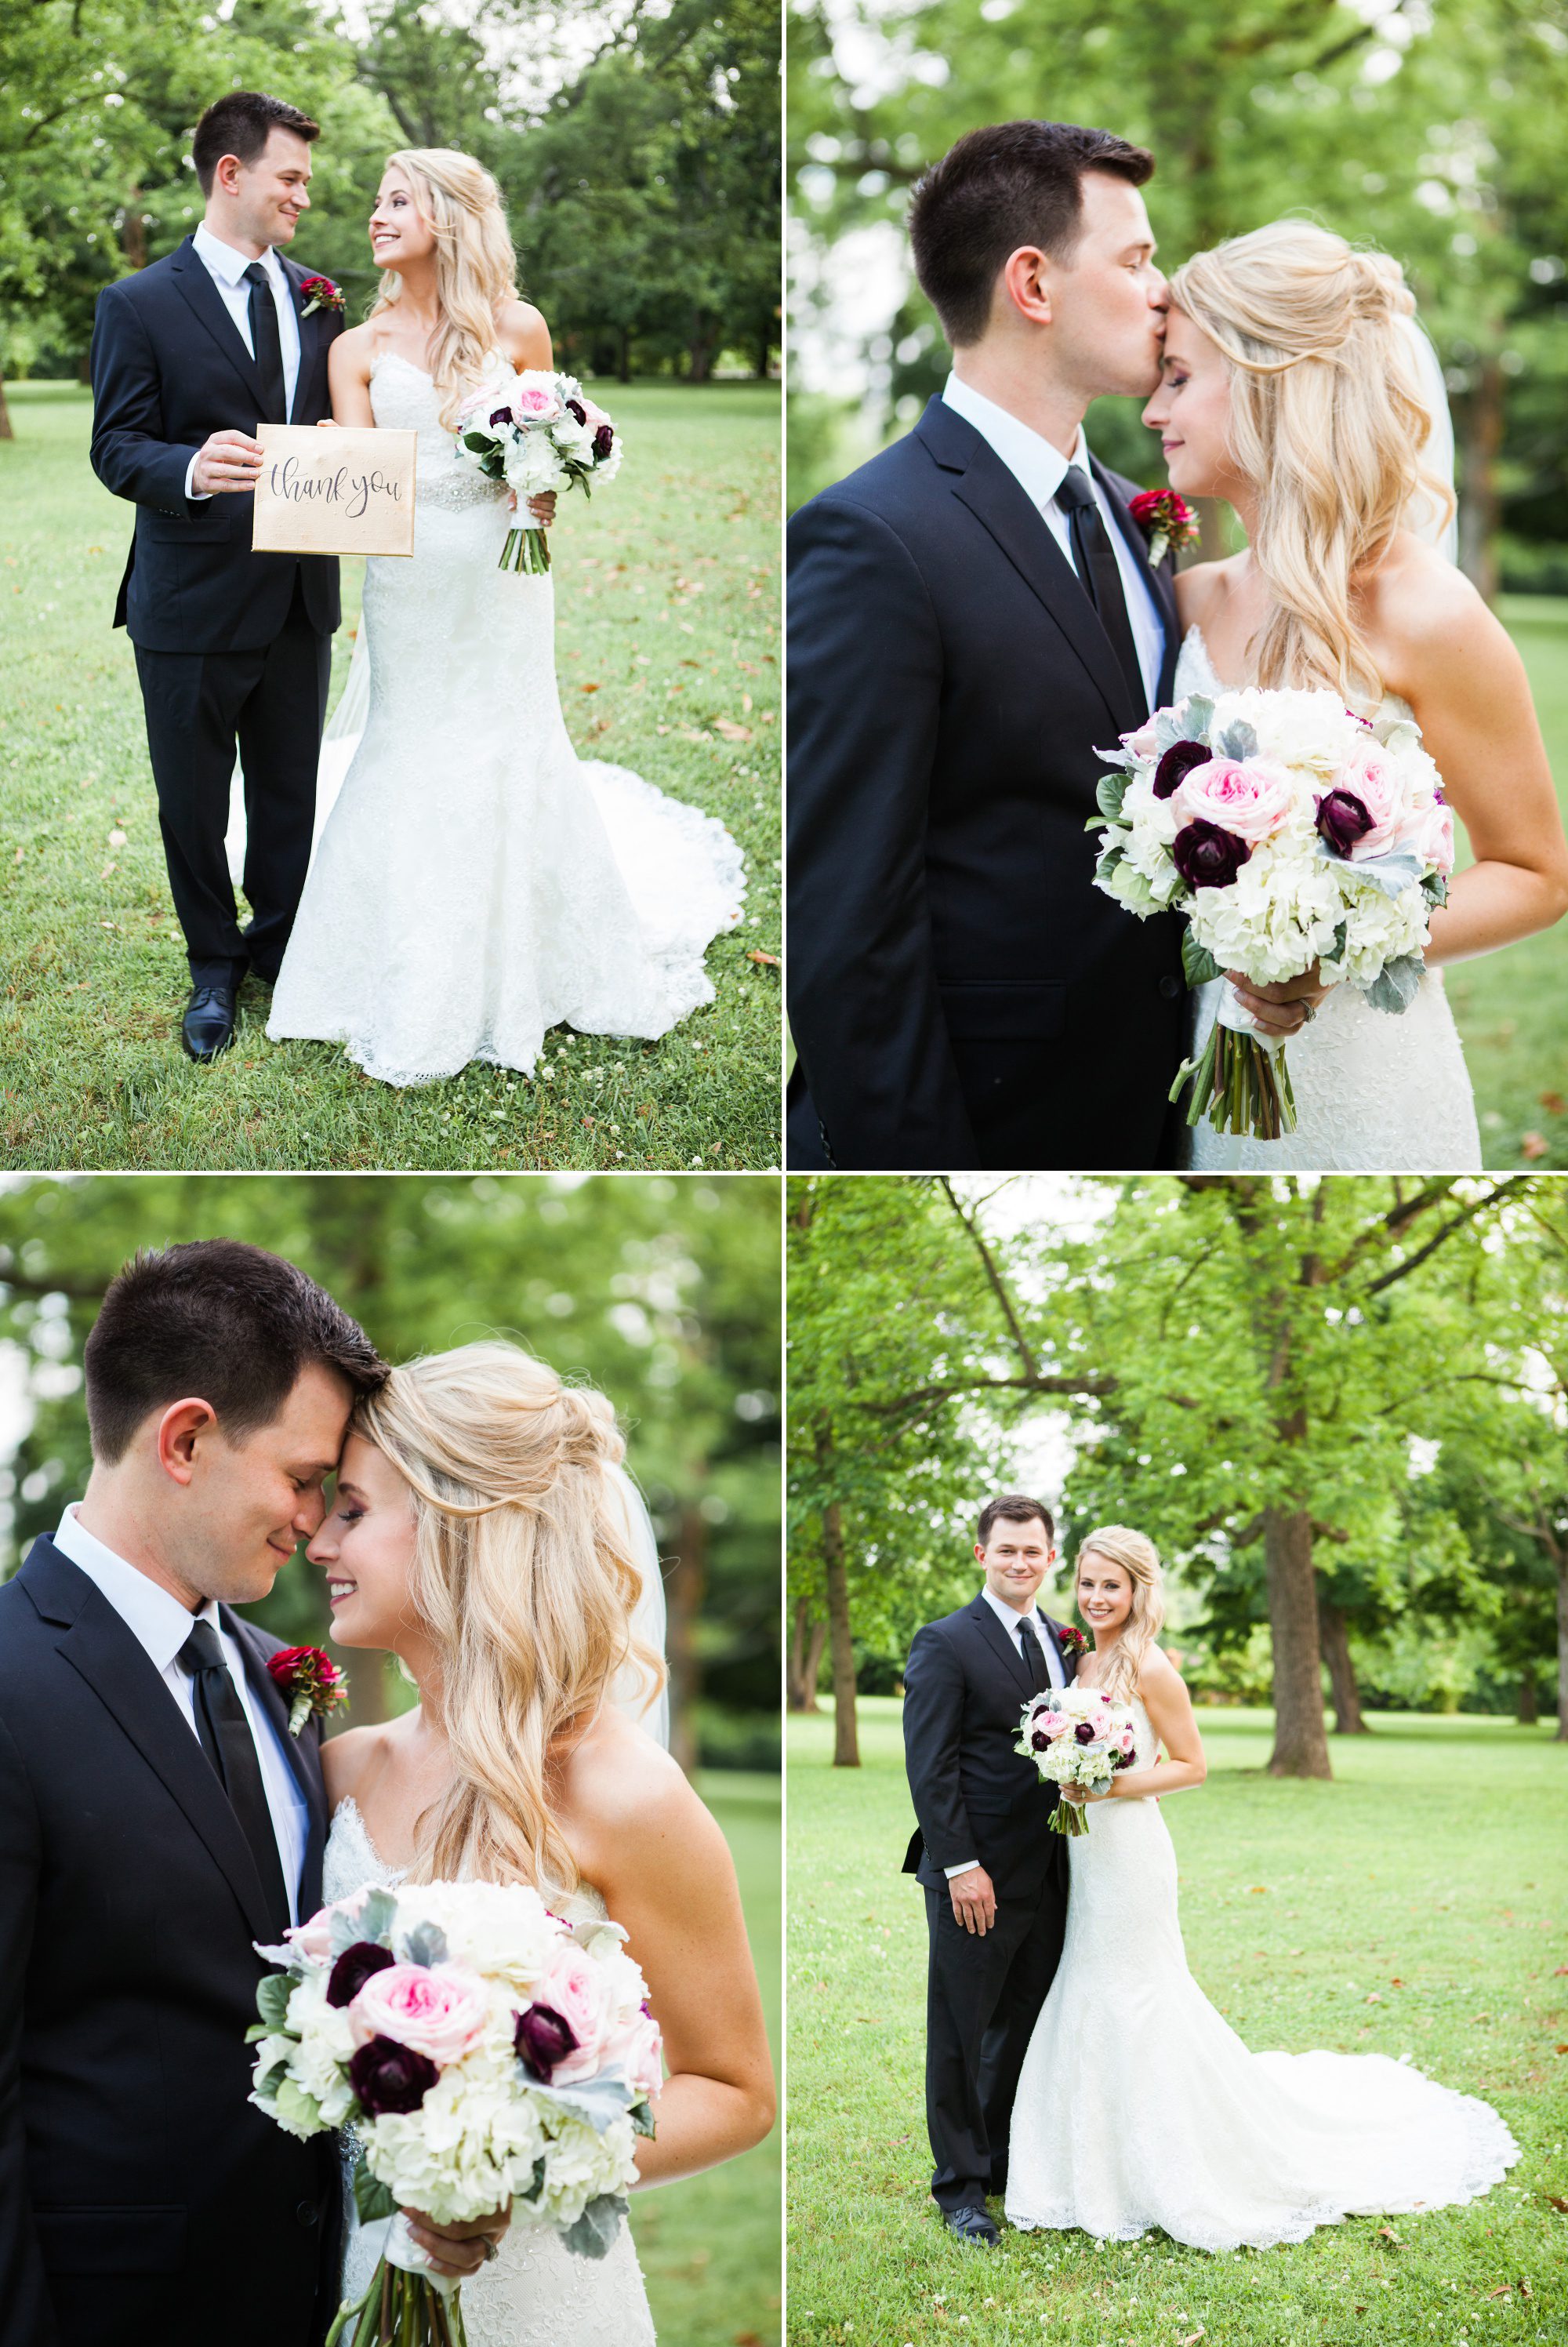 Bride and groom photos after ceremony at Riverwood Mansion in Nashville, Tennessee. Photography by Krista Lee.